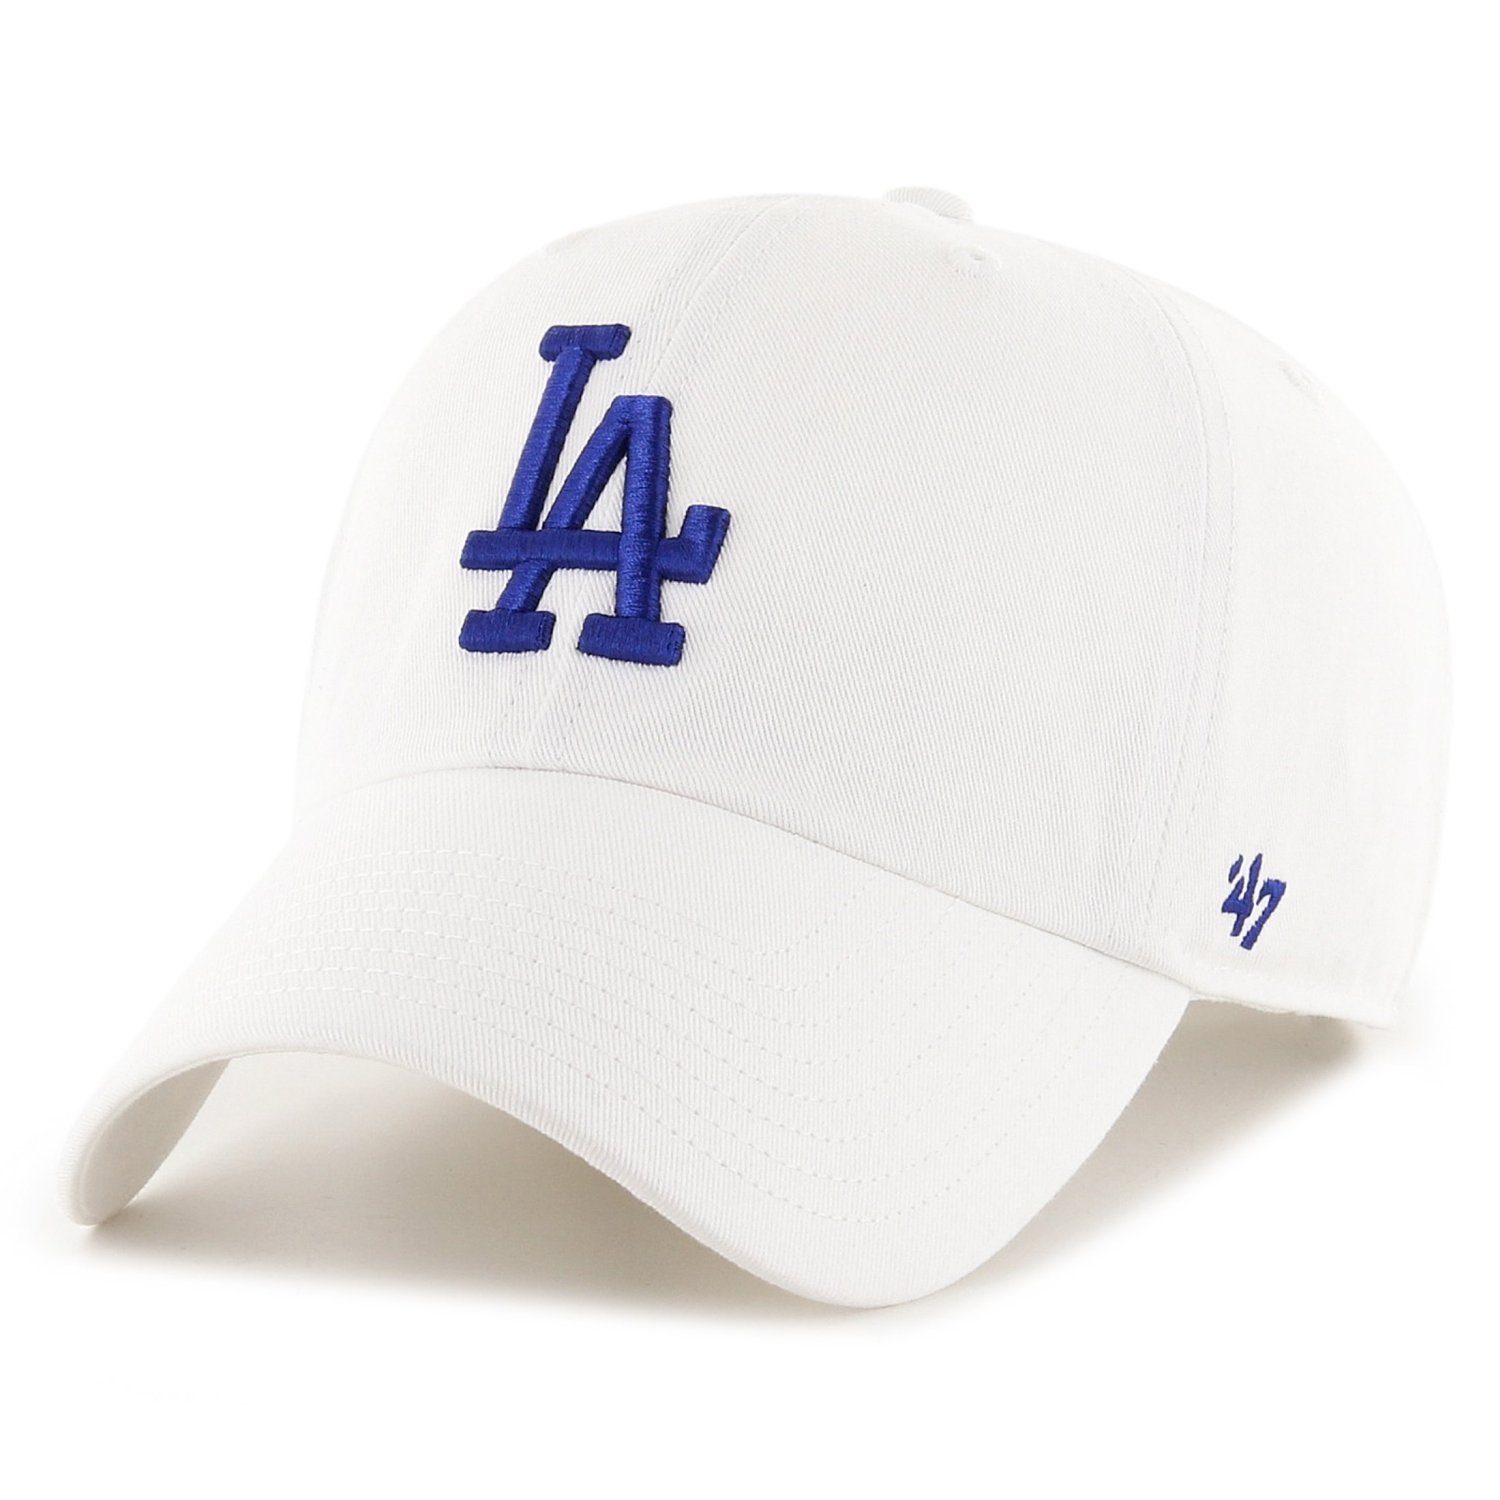 '47 Brand Trucker Cap Relaxed Fit CLEANUP Los Angeles Dodgers